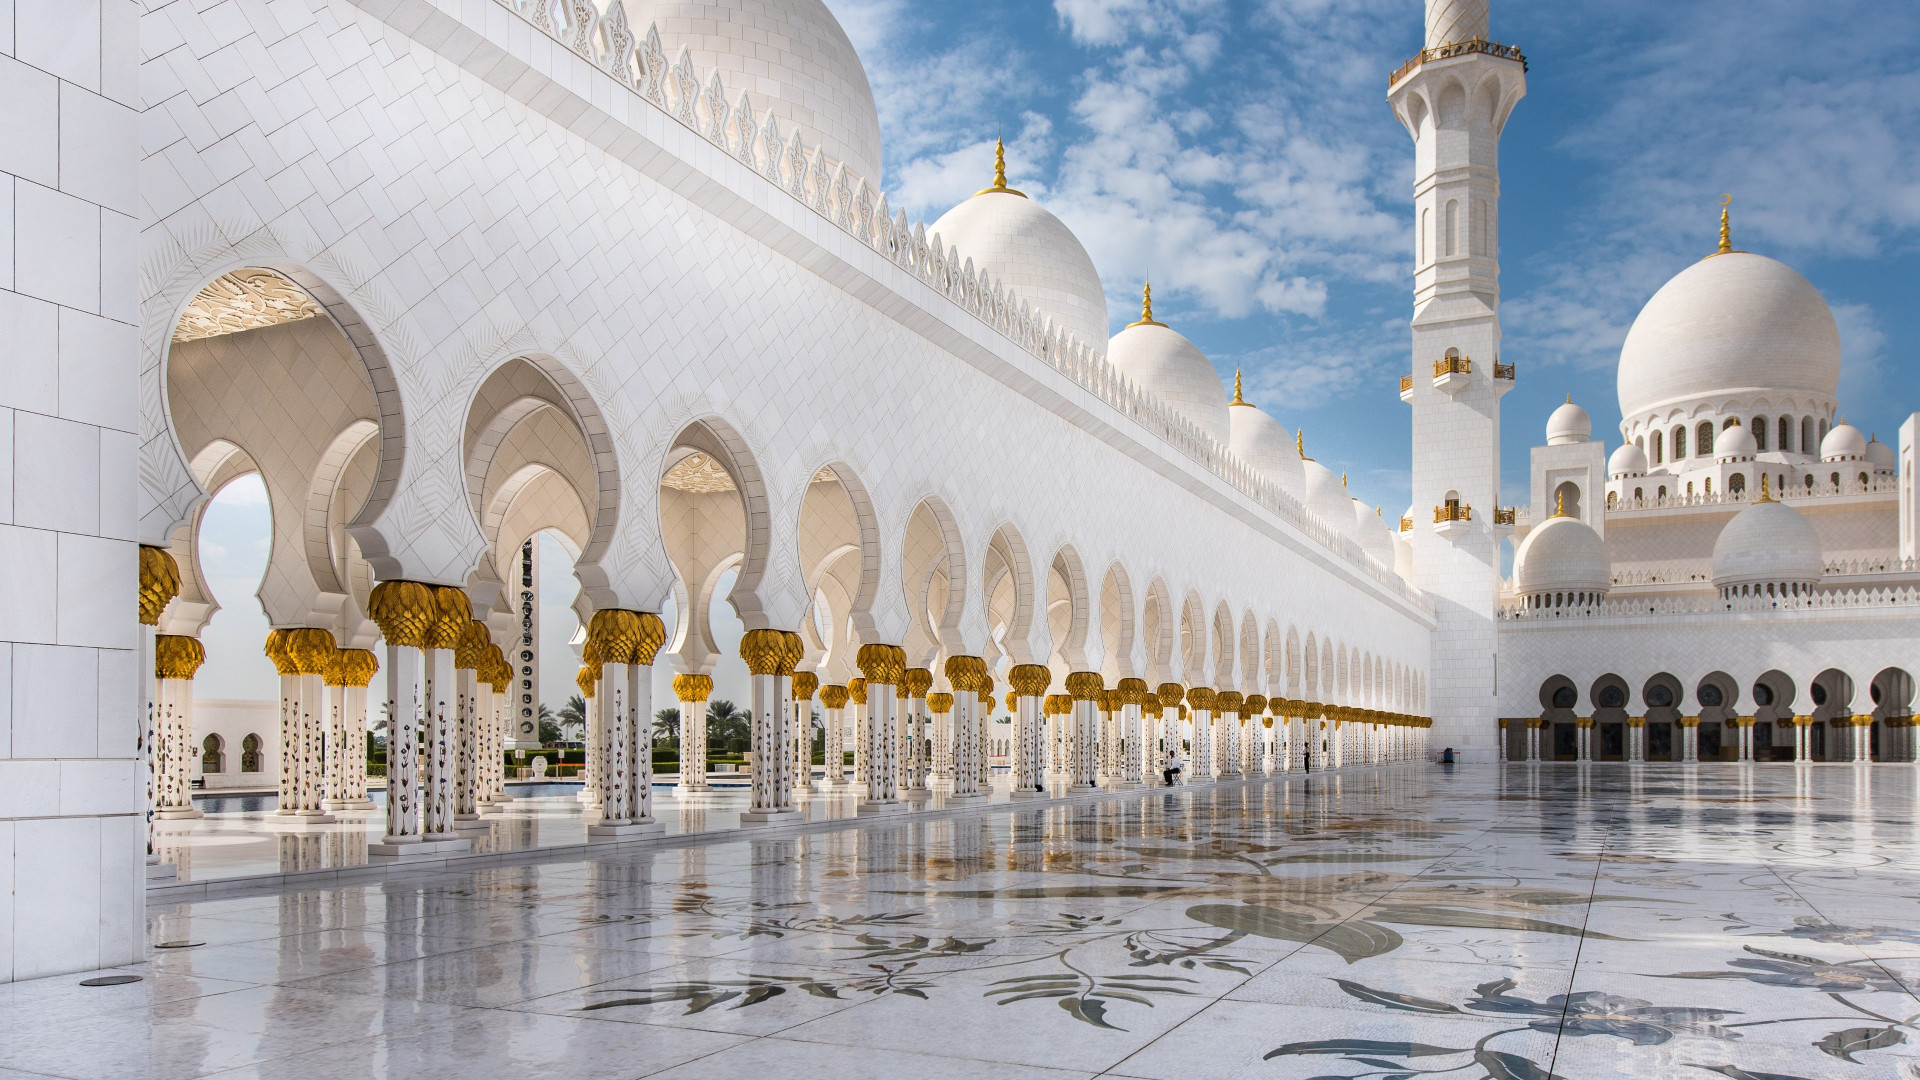 The architecture of Sheikh Zayed mosque wallpaper 1920x1080